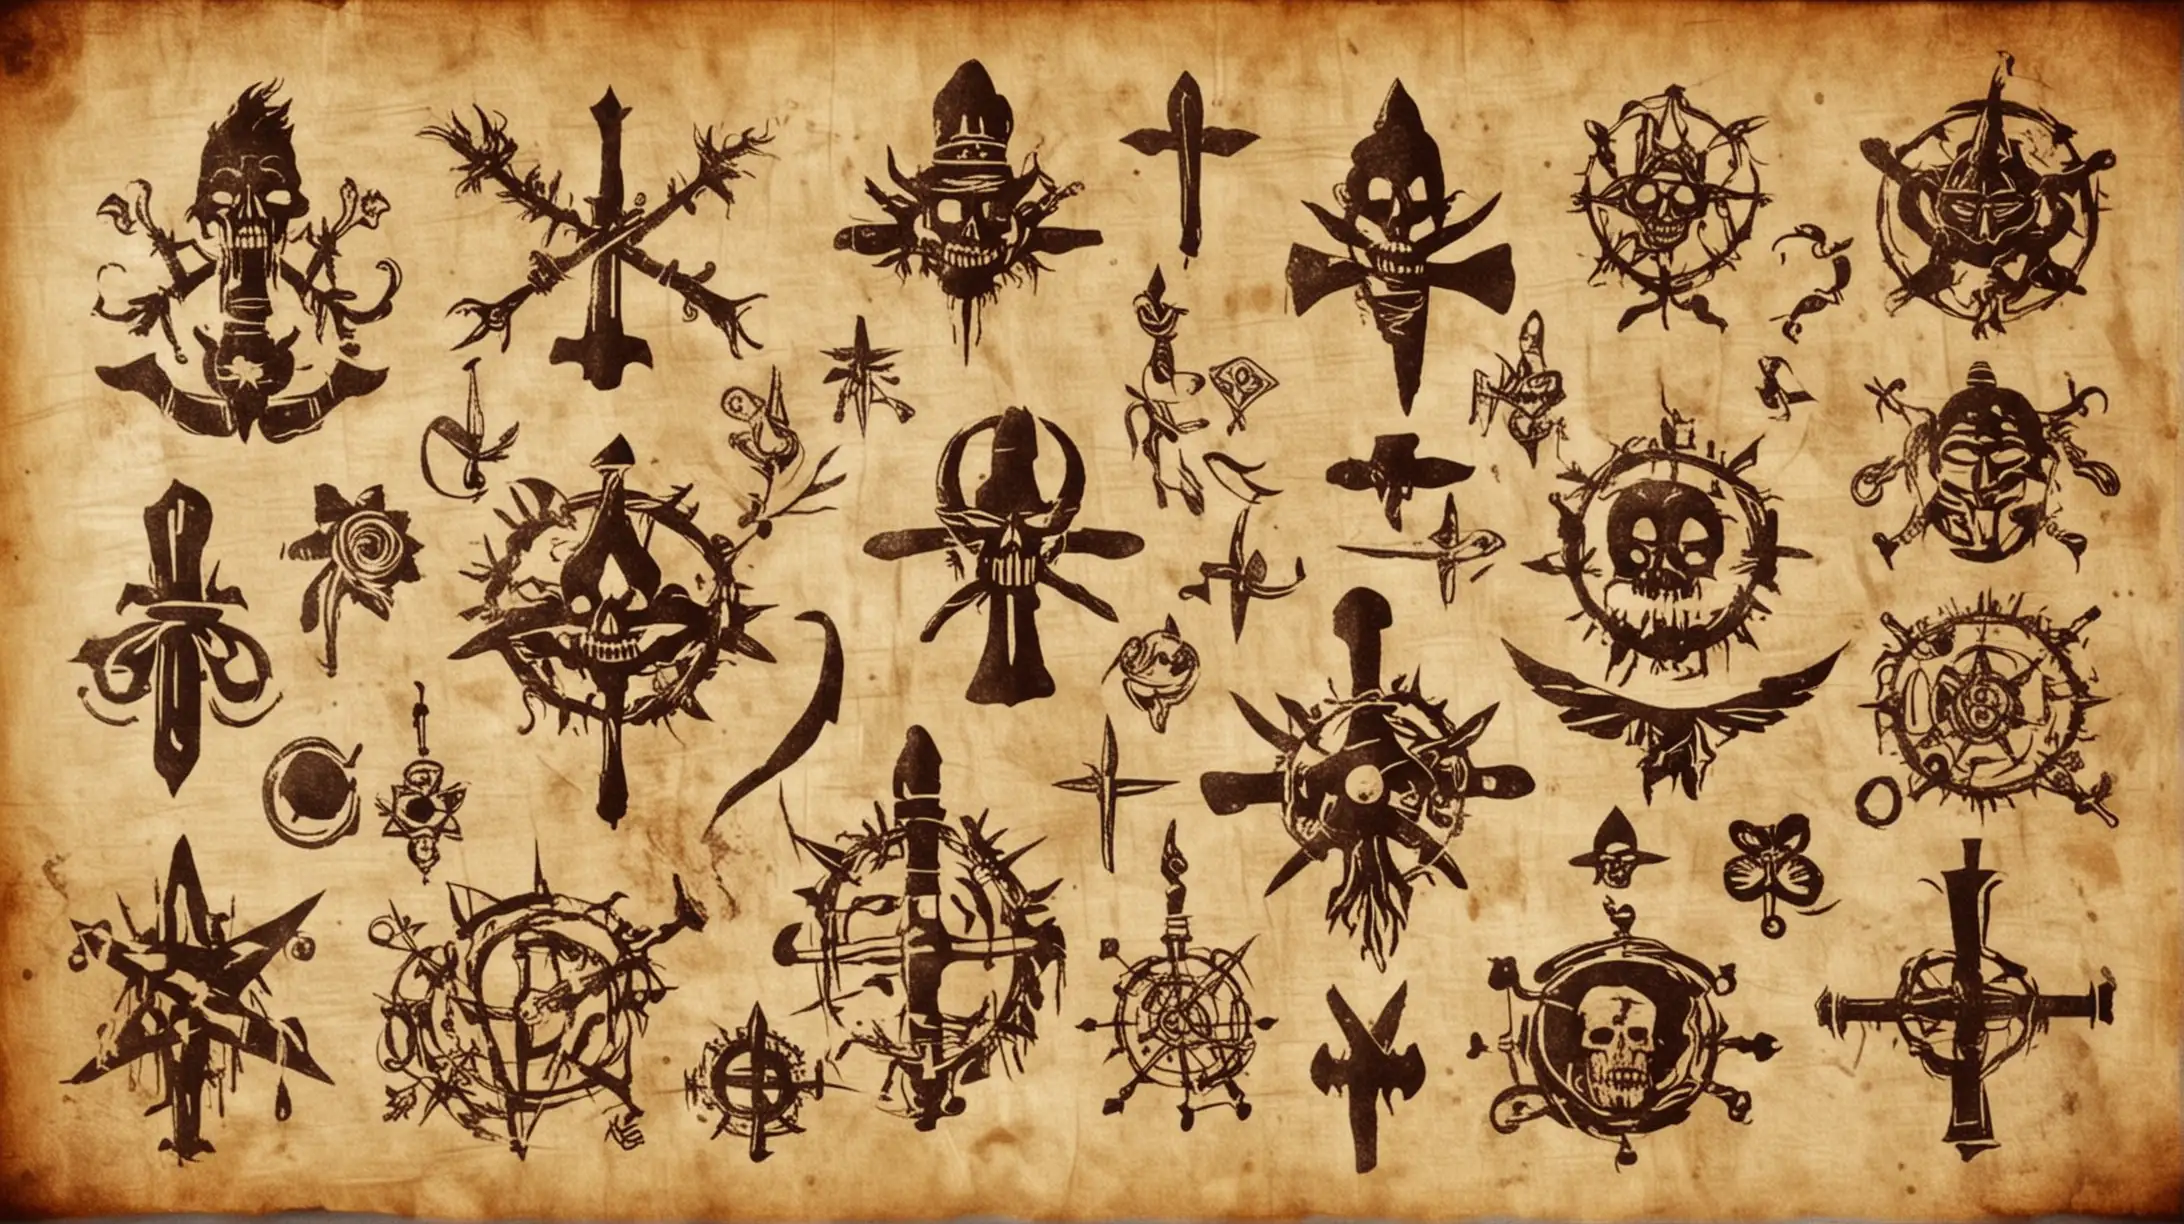 voodoo symbols on parchment paper that looks real old